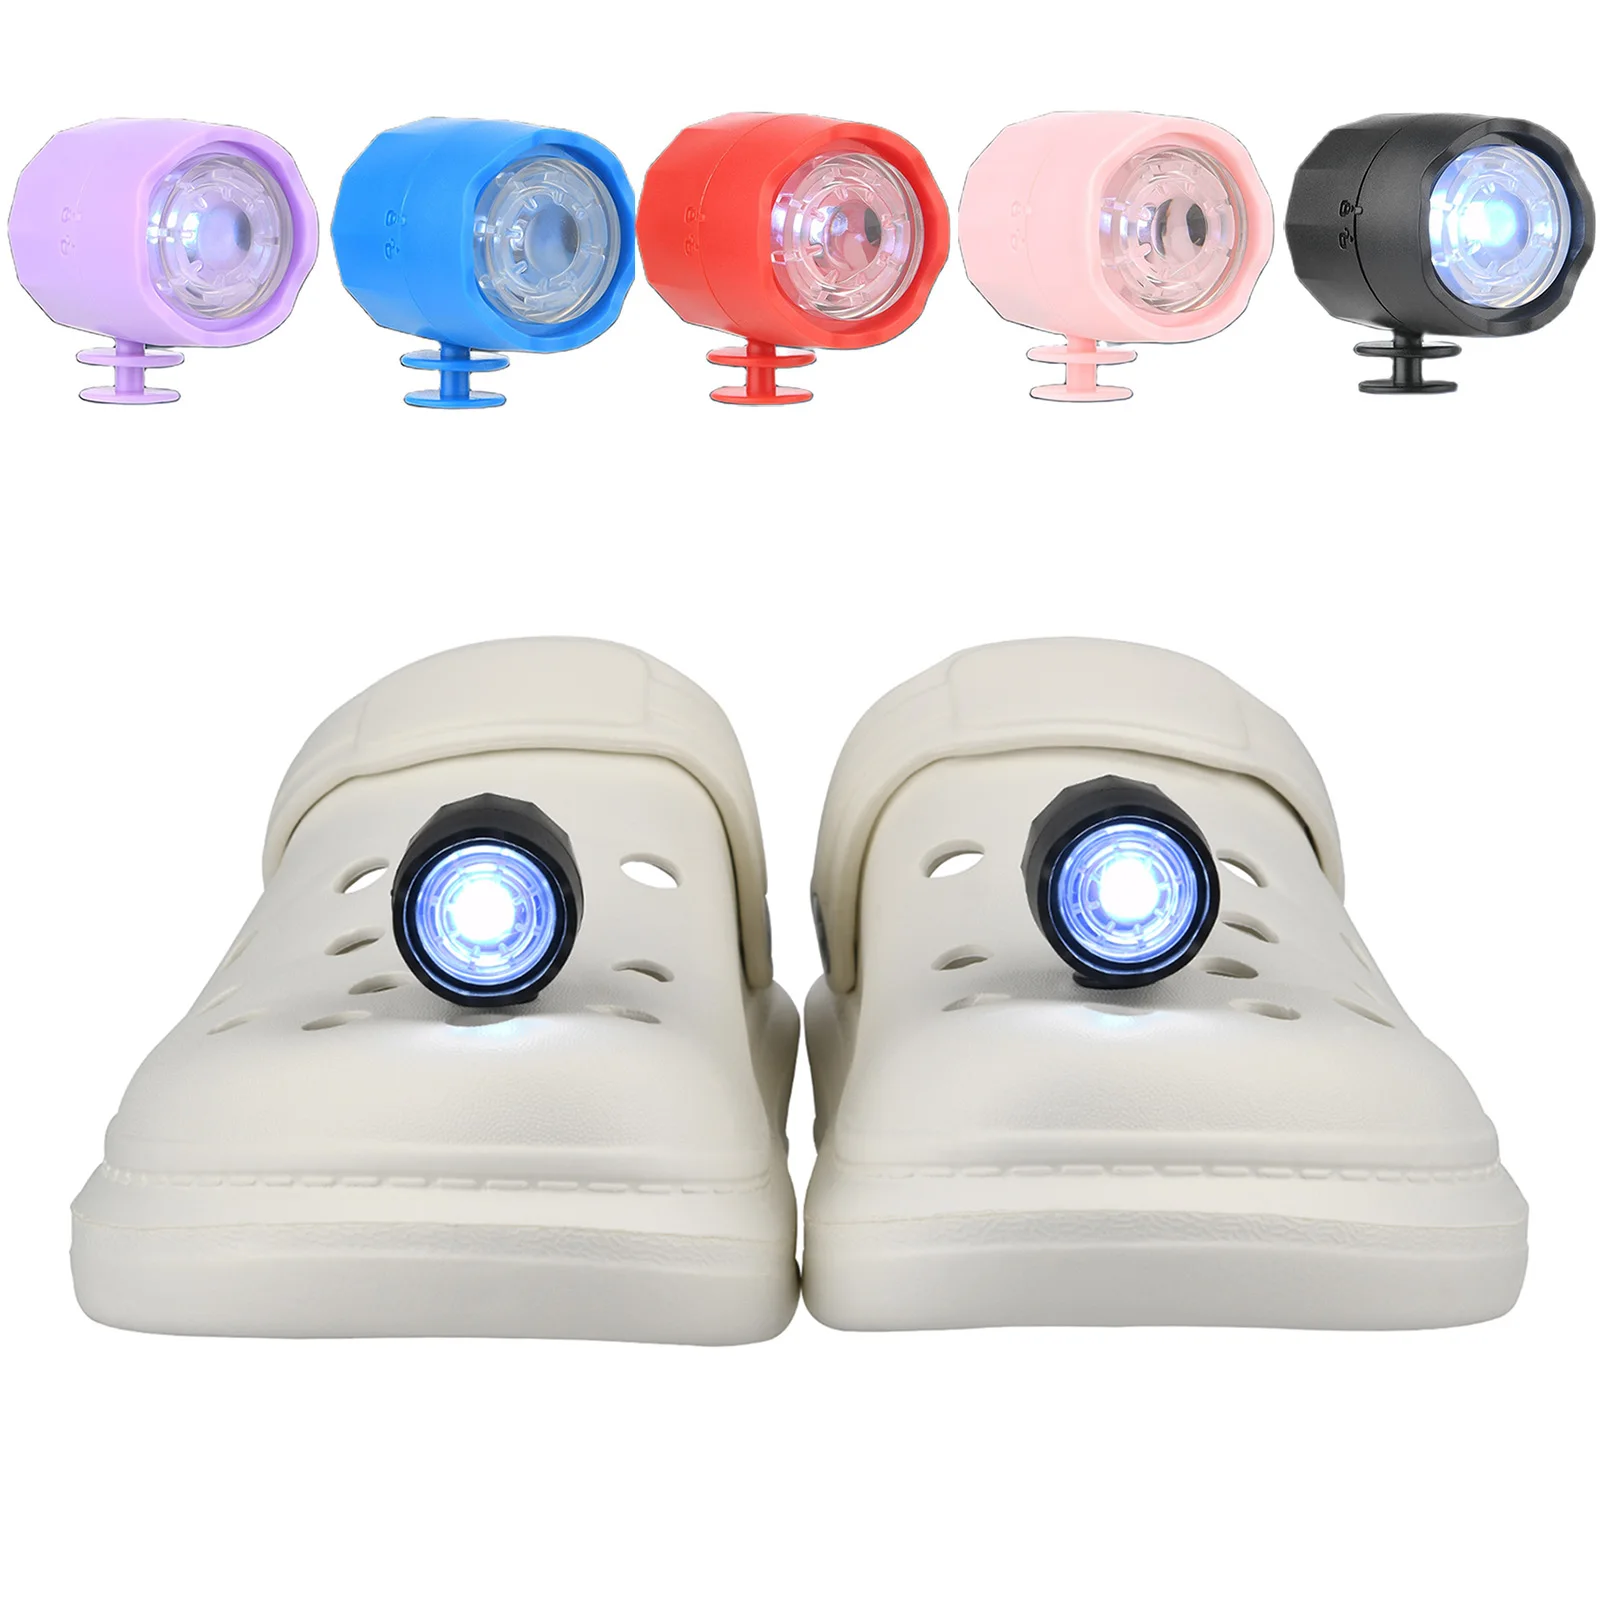 Croc Headlights, Light Shoes Decoration Accessories for Running Walking Camping Gift Rechargeable Headlights For Shoe Lights